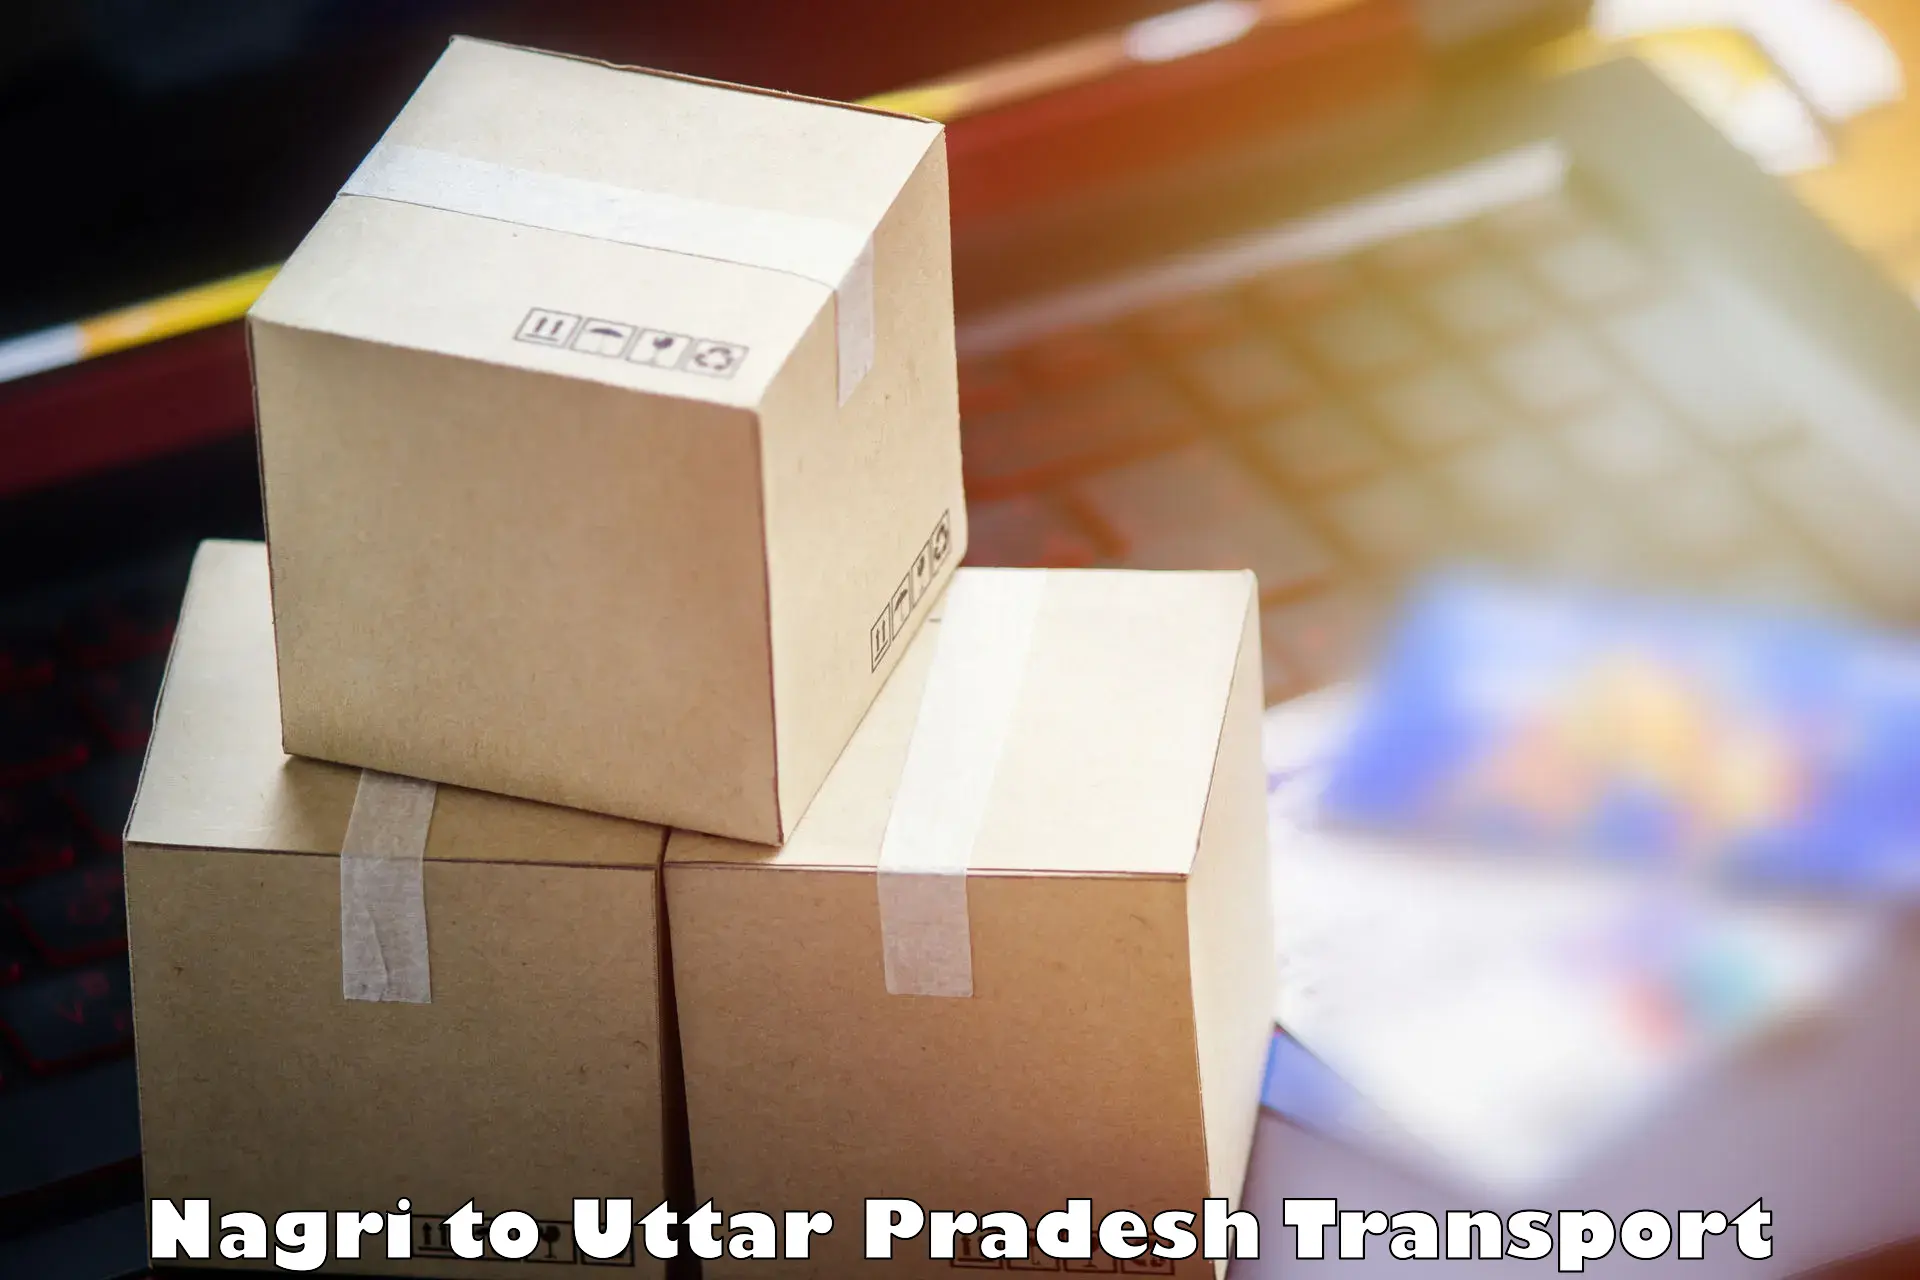 Road transport online services Nagri to Agra